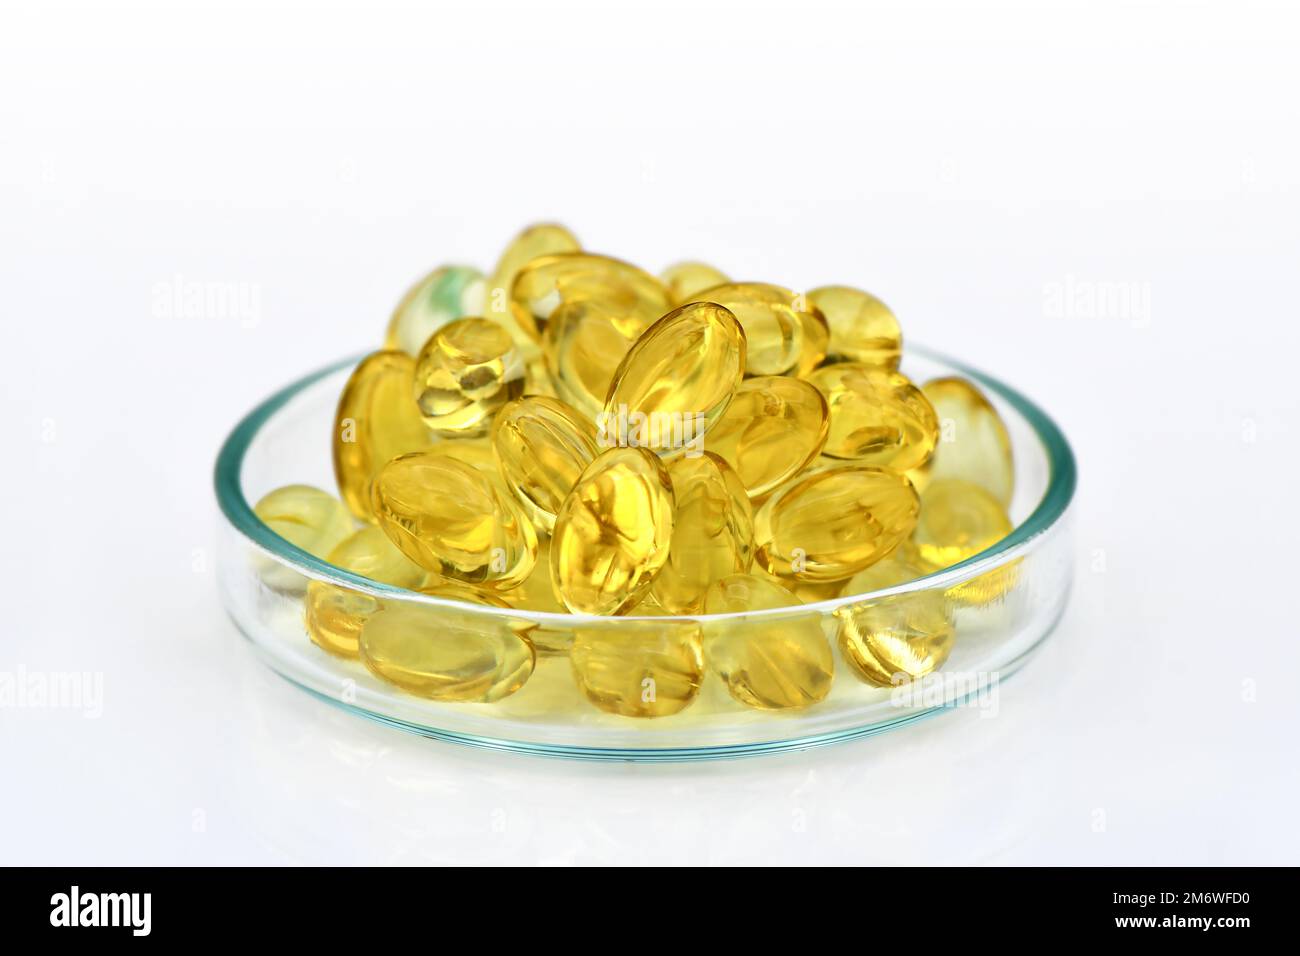 Soft gelatin capsules of essential oil in the glass dish isolated on white background. Sample of oil capsules for advertising. Stock Photo